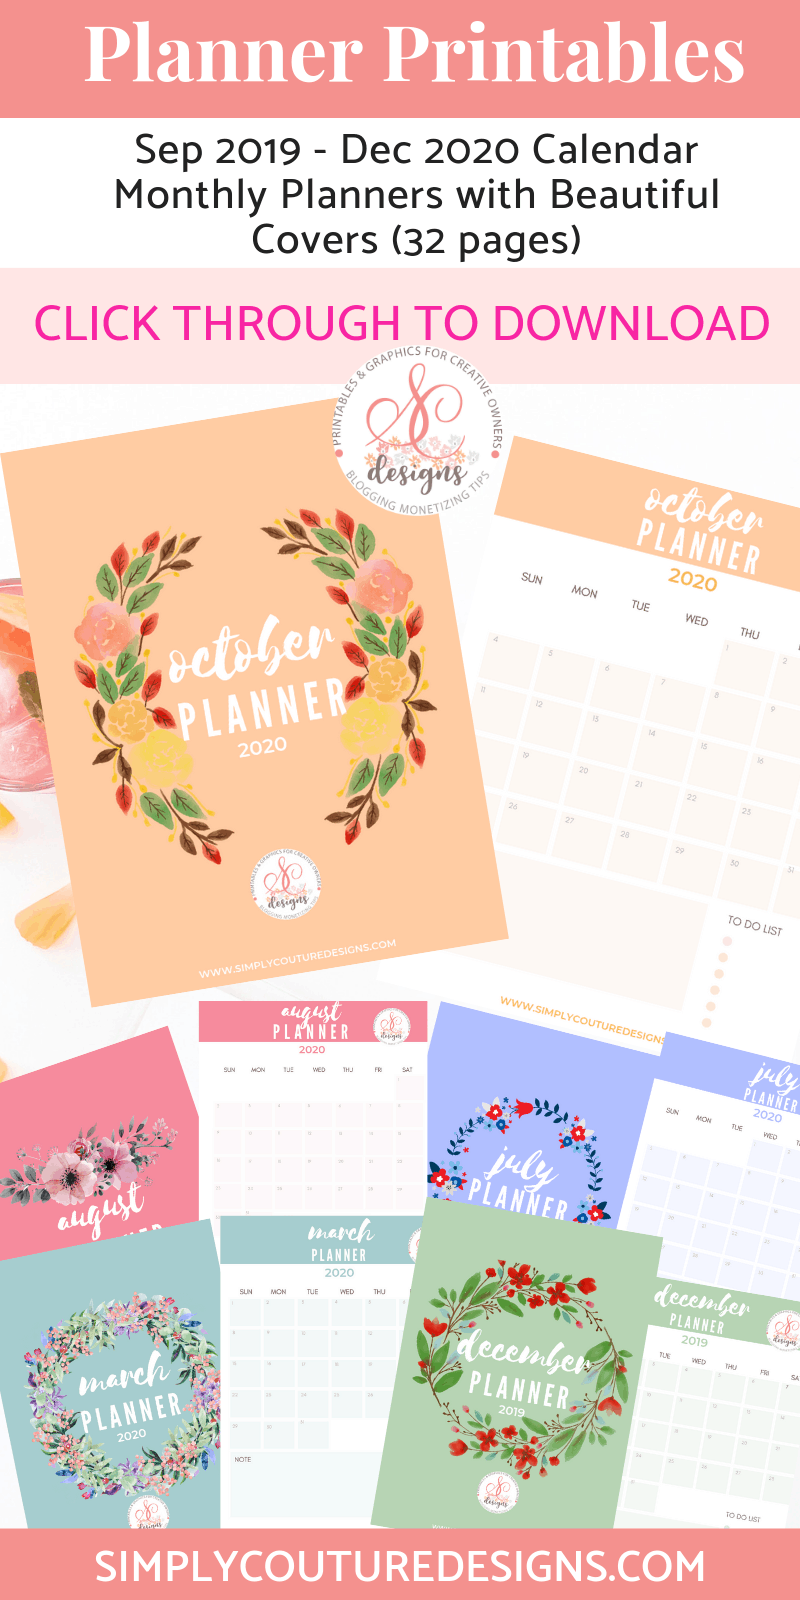 2019/2020 Monthly Calendar planner printables with beautiful floral wreath covers #2020calendarprintable #2010calendarprintable #calendarprintable #wreath #floral #plannercover #calendarplannerprintable